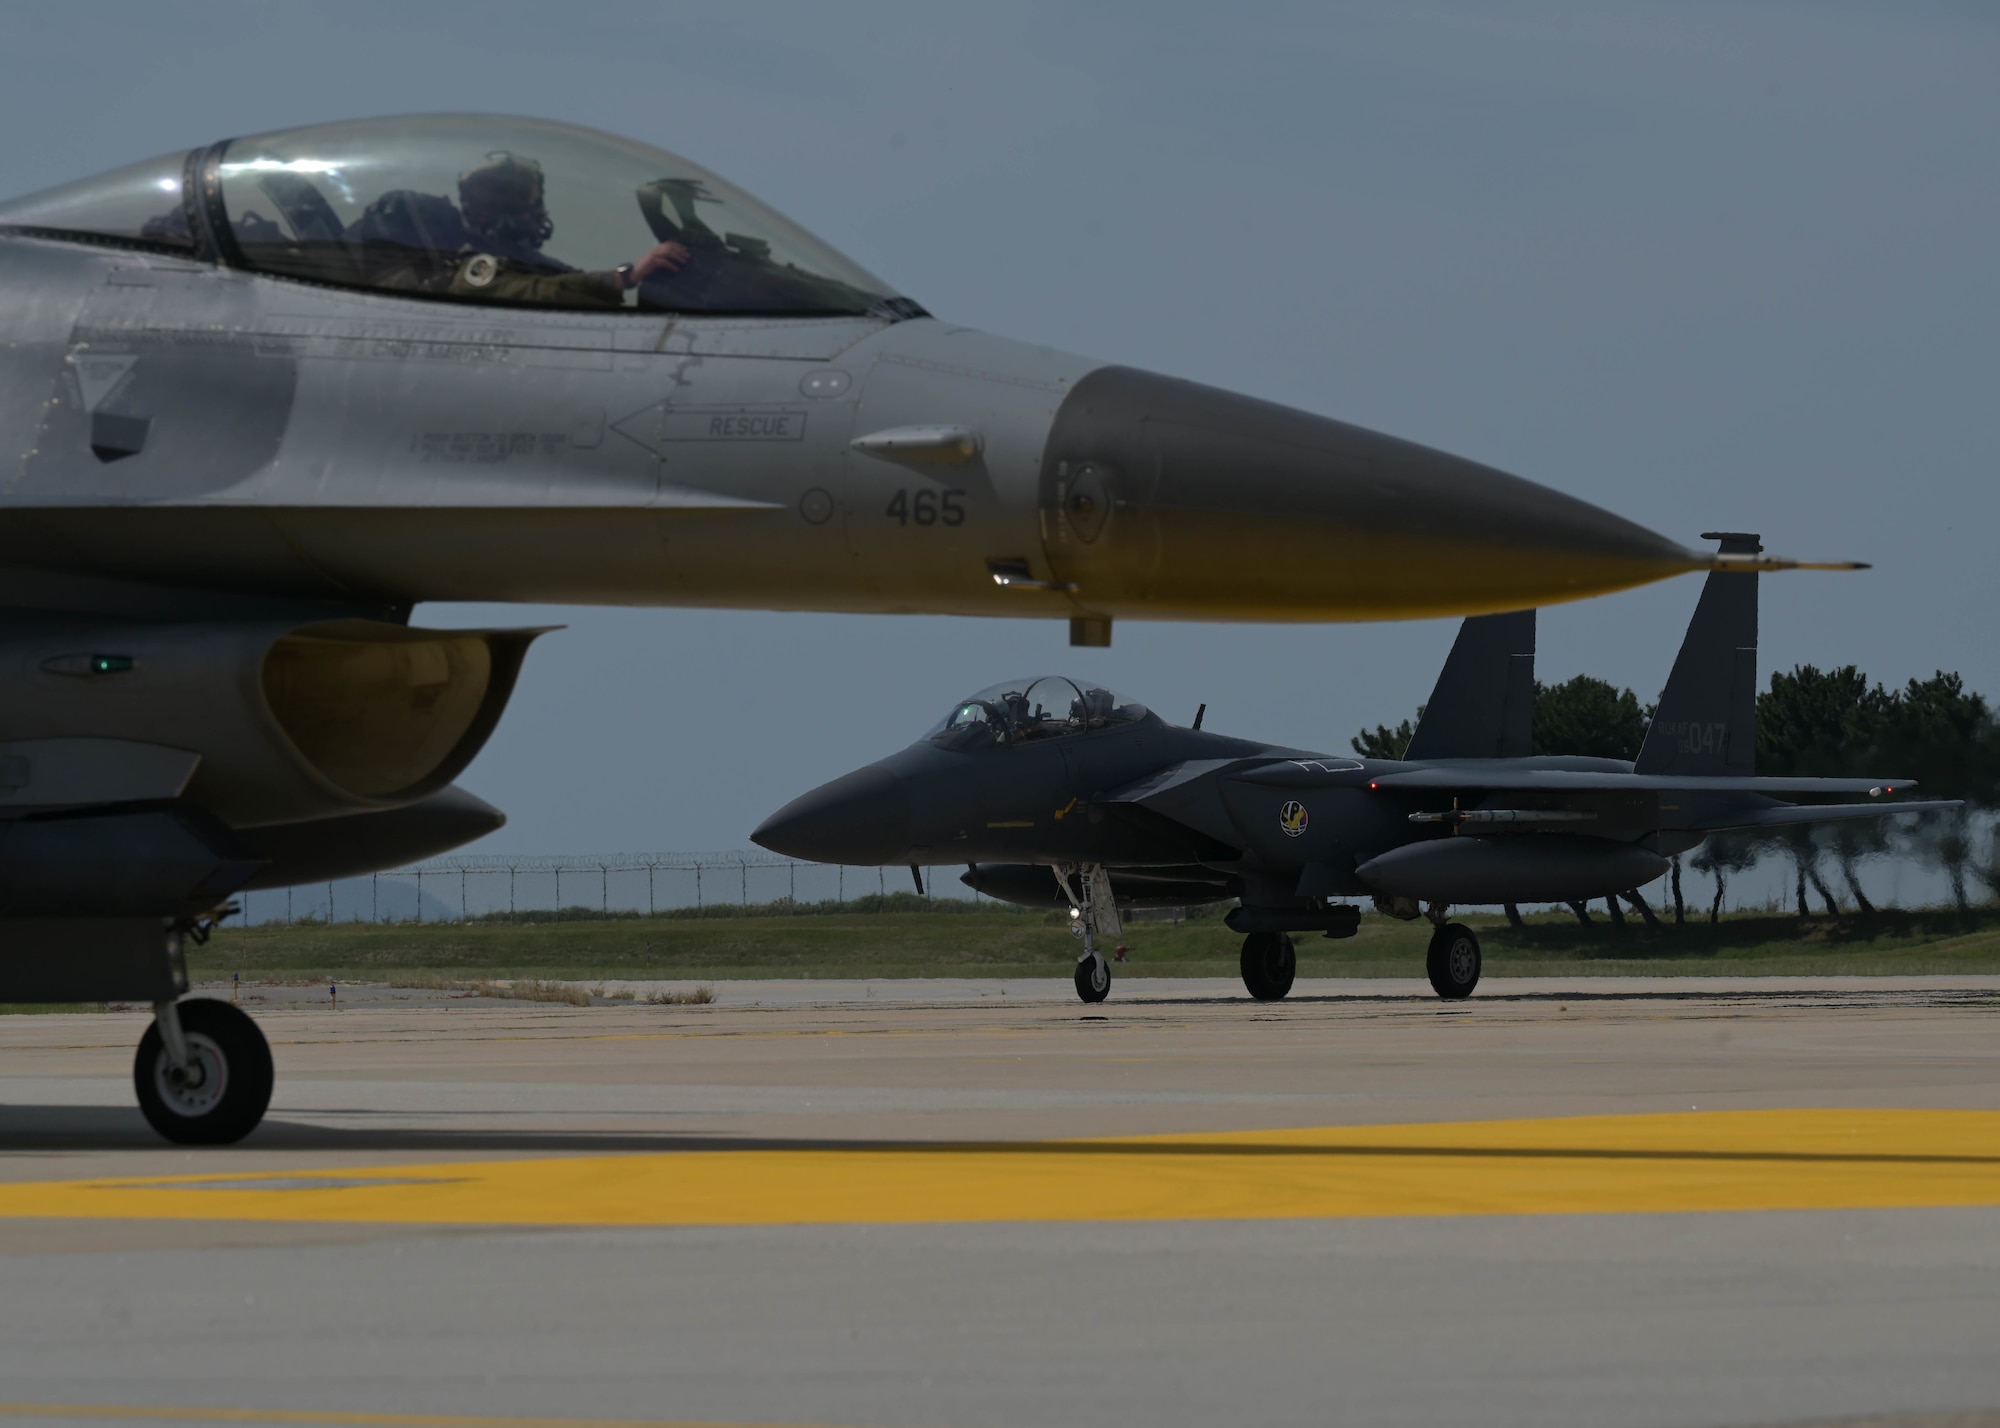 A U.S. Air Force F-16 Fighting Falcon assigned to the 8th Fighter Wing and a Republic of Korea Air Force F-15K Slam Eagle assigned to the 11th Fighter Wing, out of Daegu Air Base, ROK, taxi the flightline at Kunsan Air Base, ROK, Sept. 22, 2022. This bilateral training event, known as Buddy Squadron, is designed to increase interoperability between partner nations and promotes a free and open Indo-Pacific region. (U.S. Air Force photo by Staff Sgt. Isaiah J. Soliz)